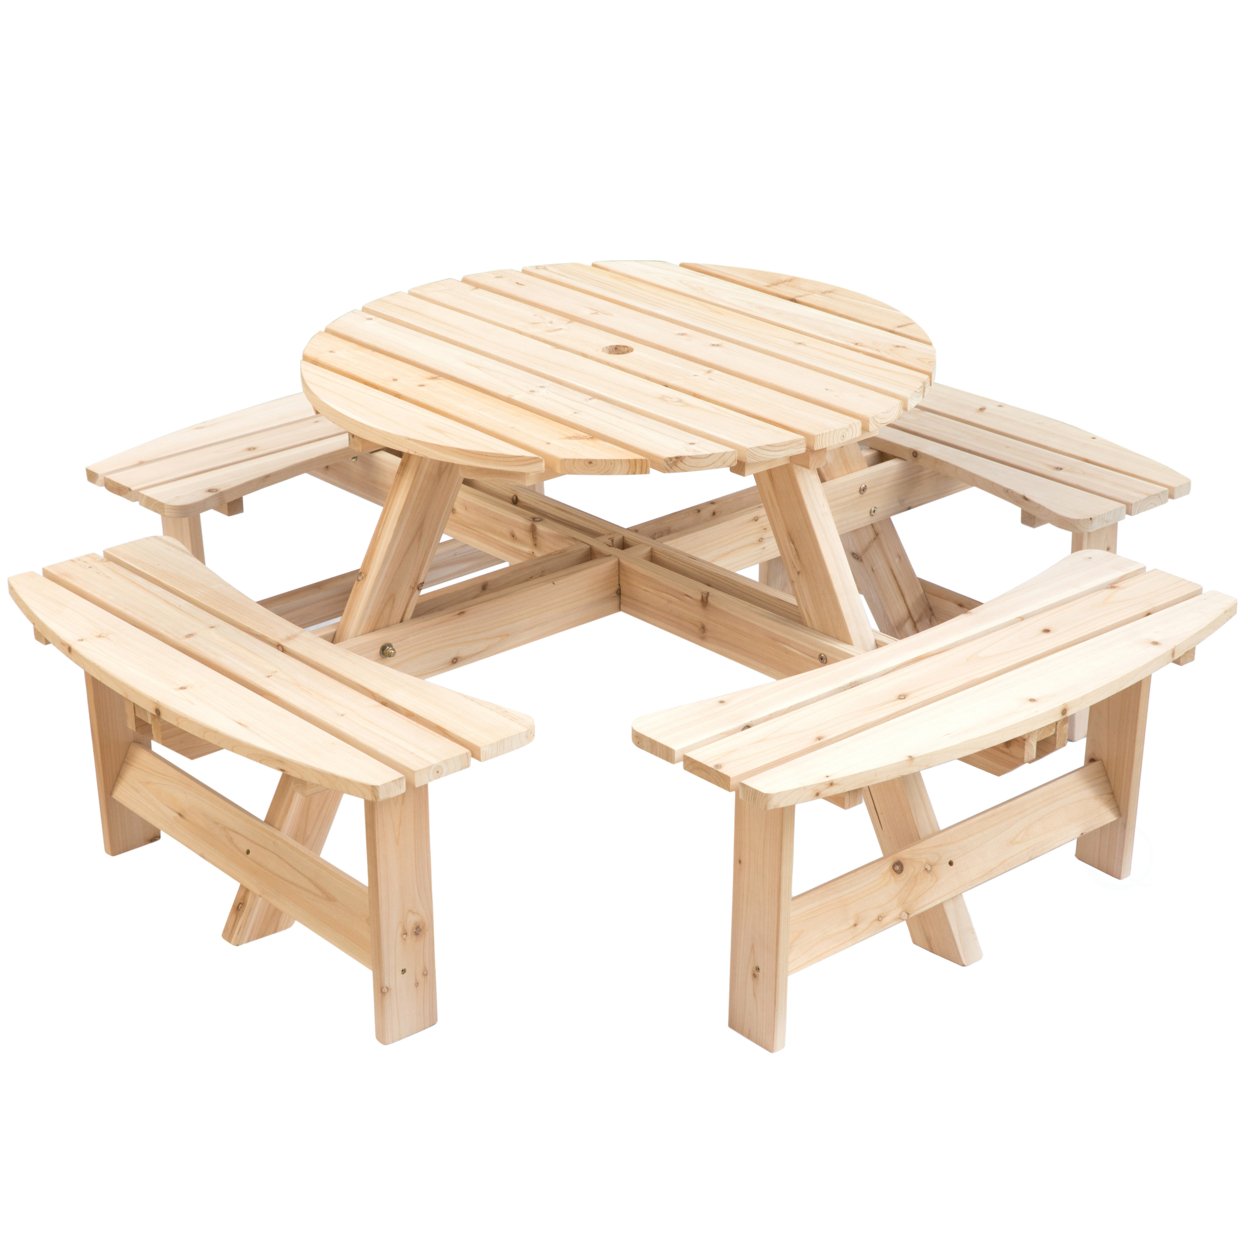 Wooden Outdoor Patio Garden Round Picnic Table With Bench, 8 Person - Stained